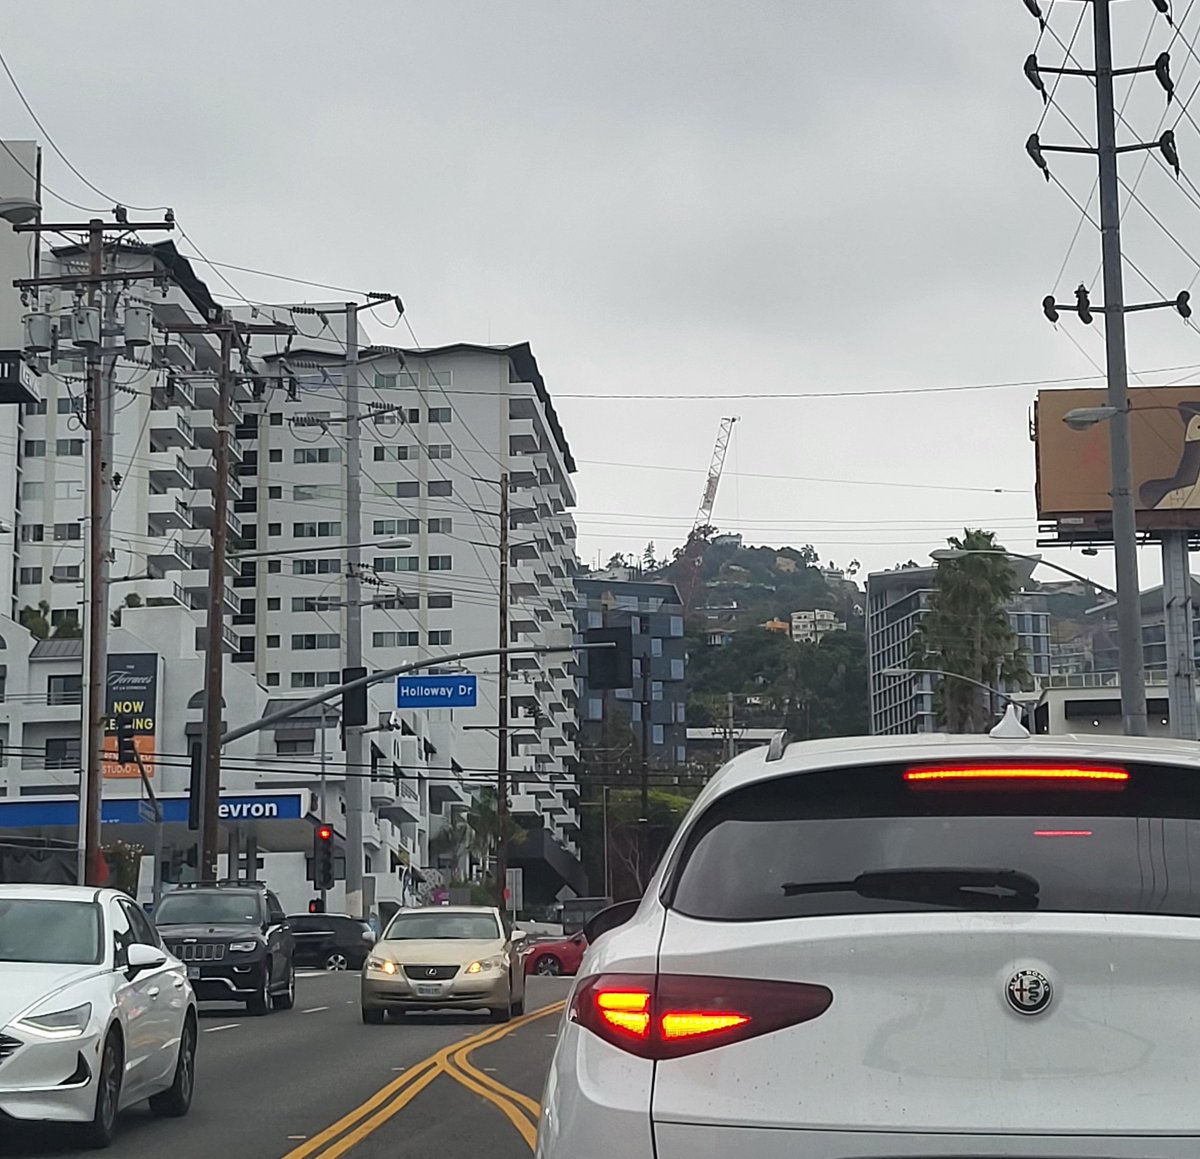 From certain angles driving toward West Hollywood or the Hollywood Hills can feel like driving toward the hillside areas of (deeply hilly and vertical) #Monterrey, Mexico, 🤓 iykyk